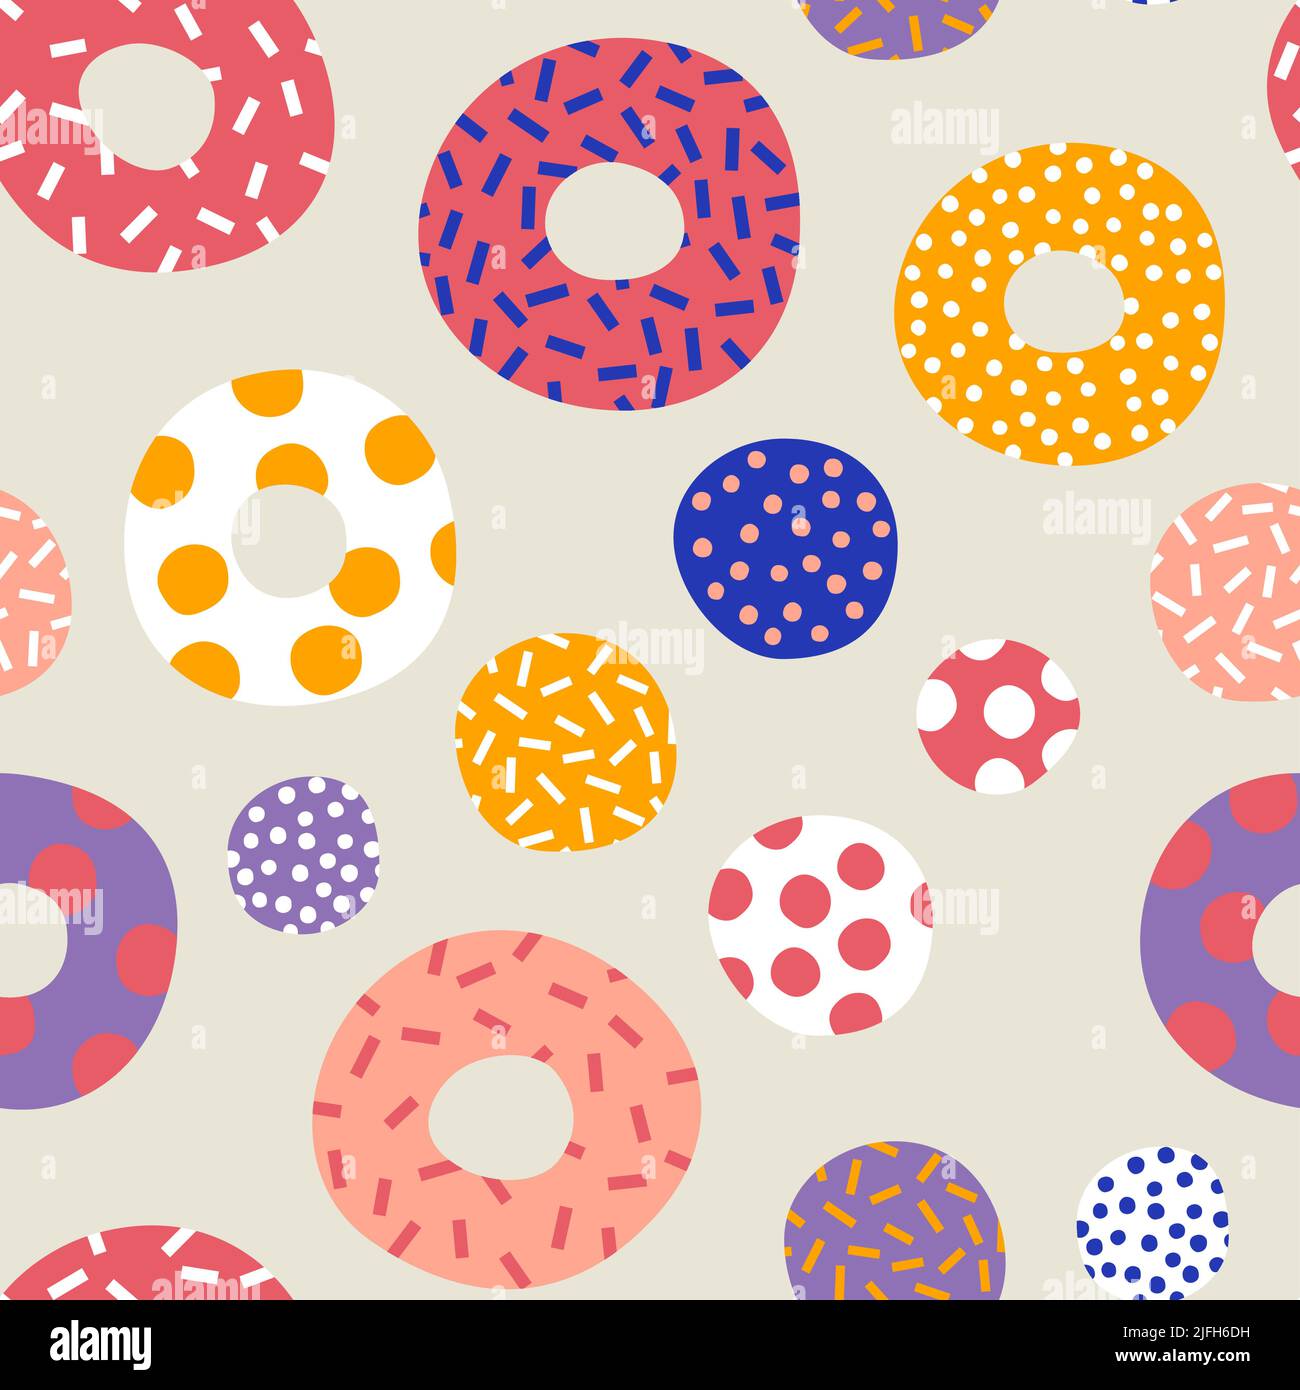 Vector Colorful Abstract Donut Cake with Topping or Frosting Seamless Pattern for Packaging or Gift Wrapping Paper. Stock Vector